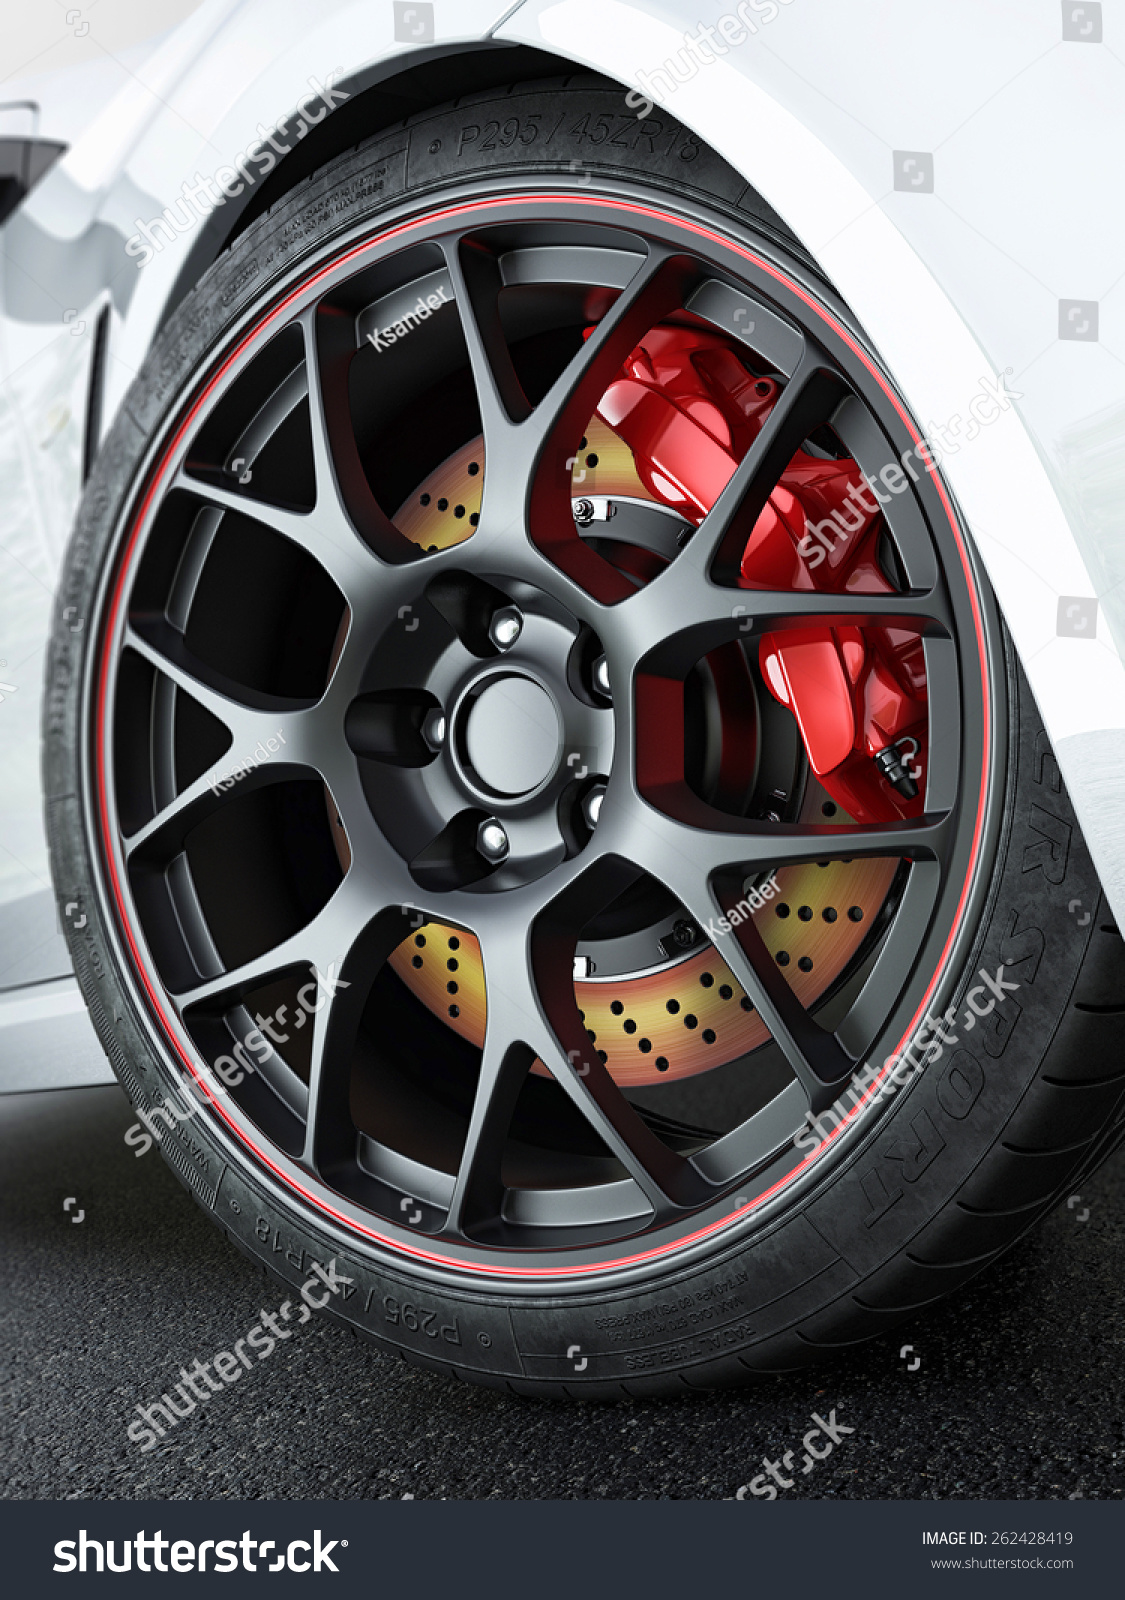 clipart of car brakes - photo #6